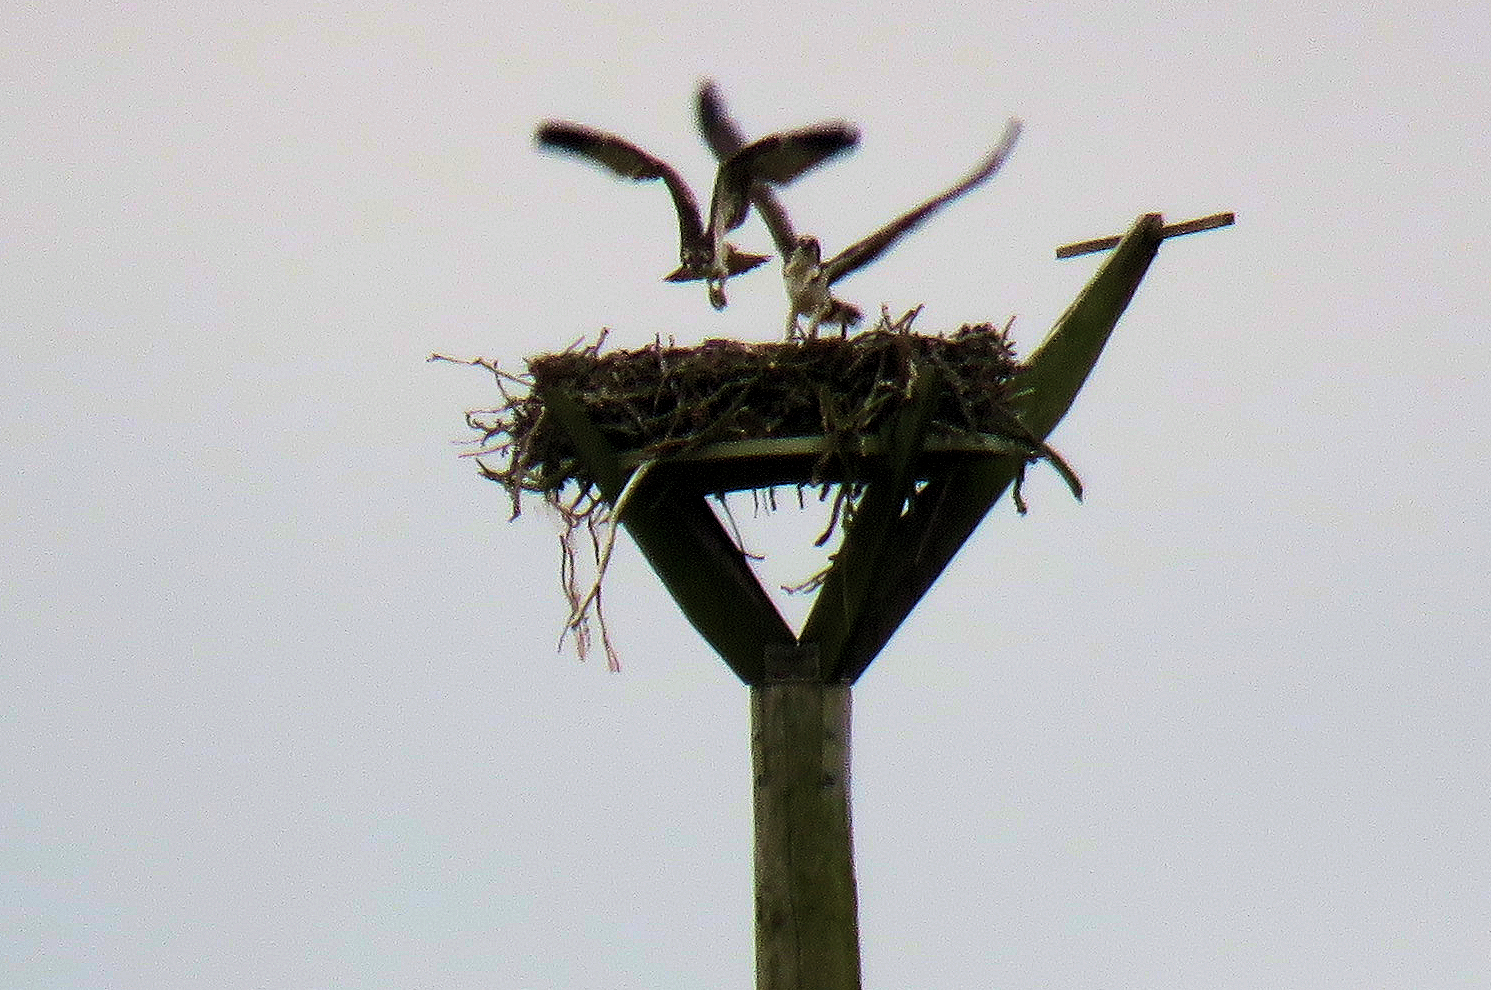 SSEN Transmission_Two of the osprey chicks stretch their wings at the purpose-built nest.JPG